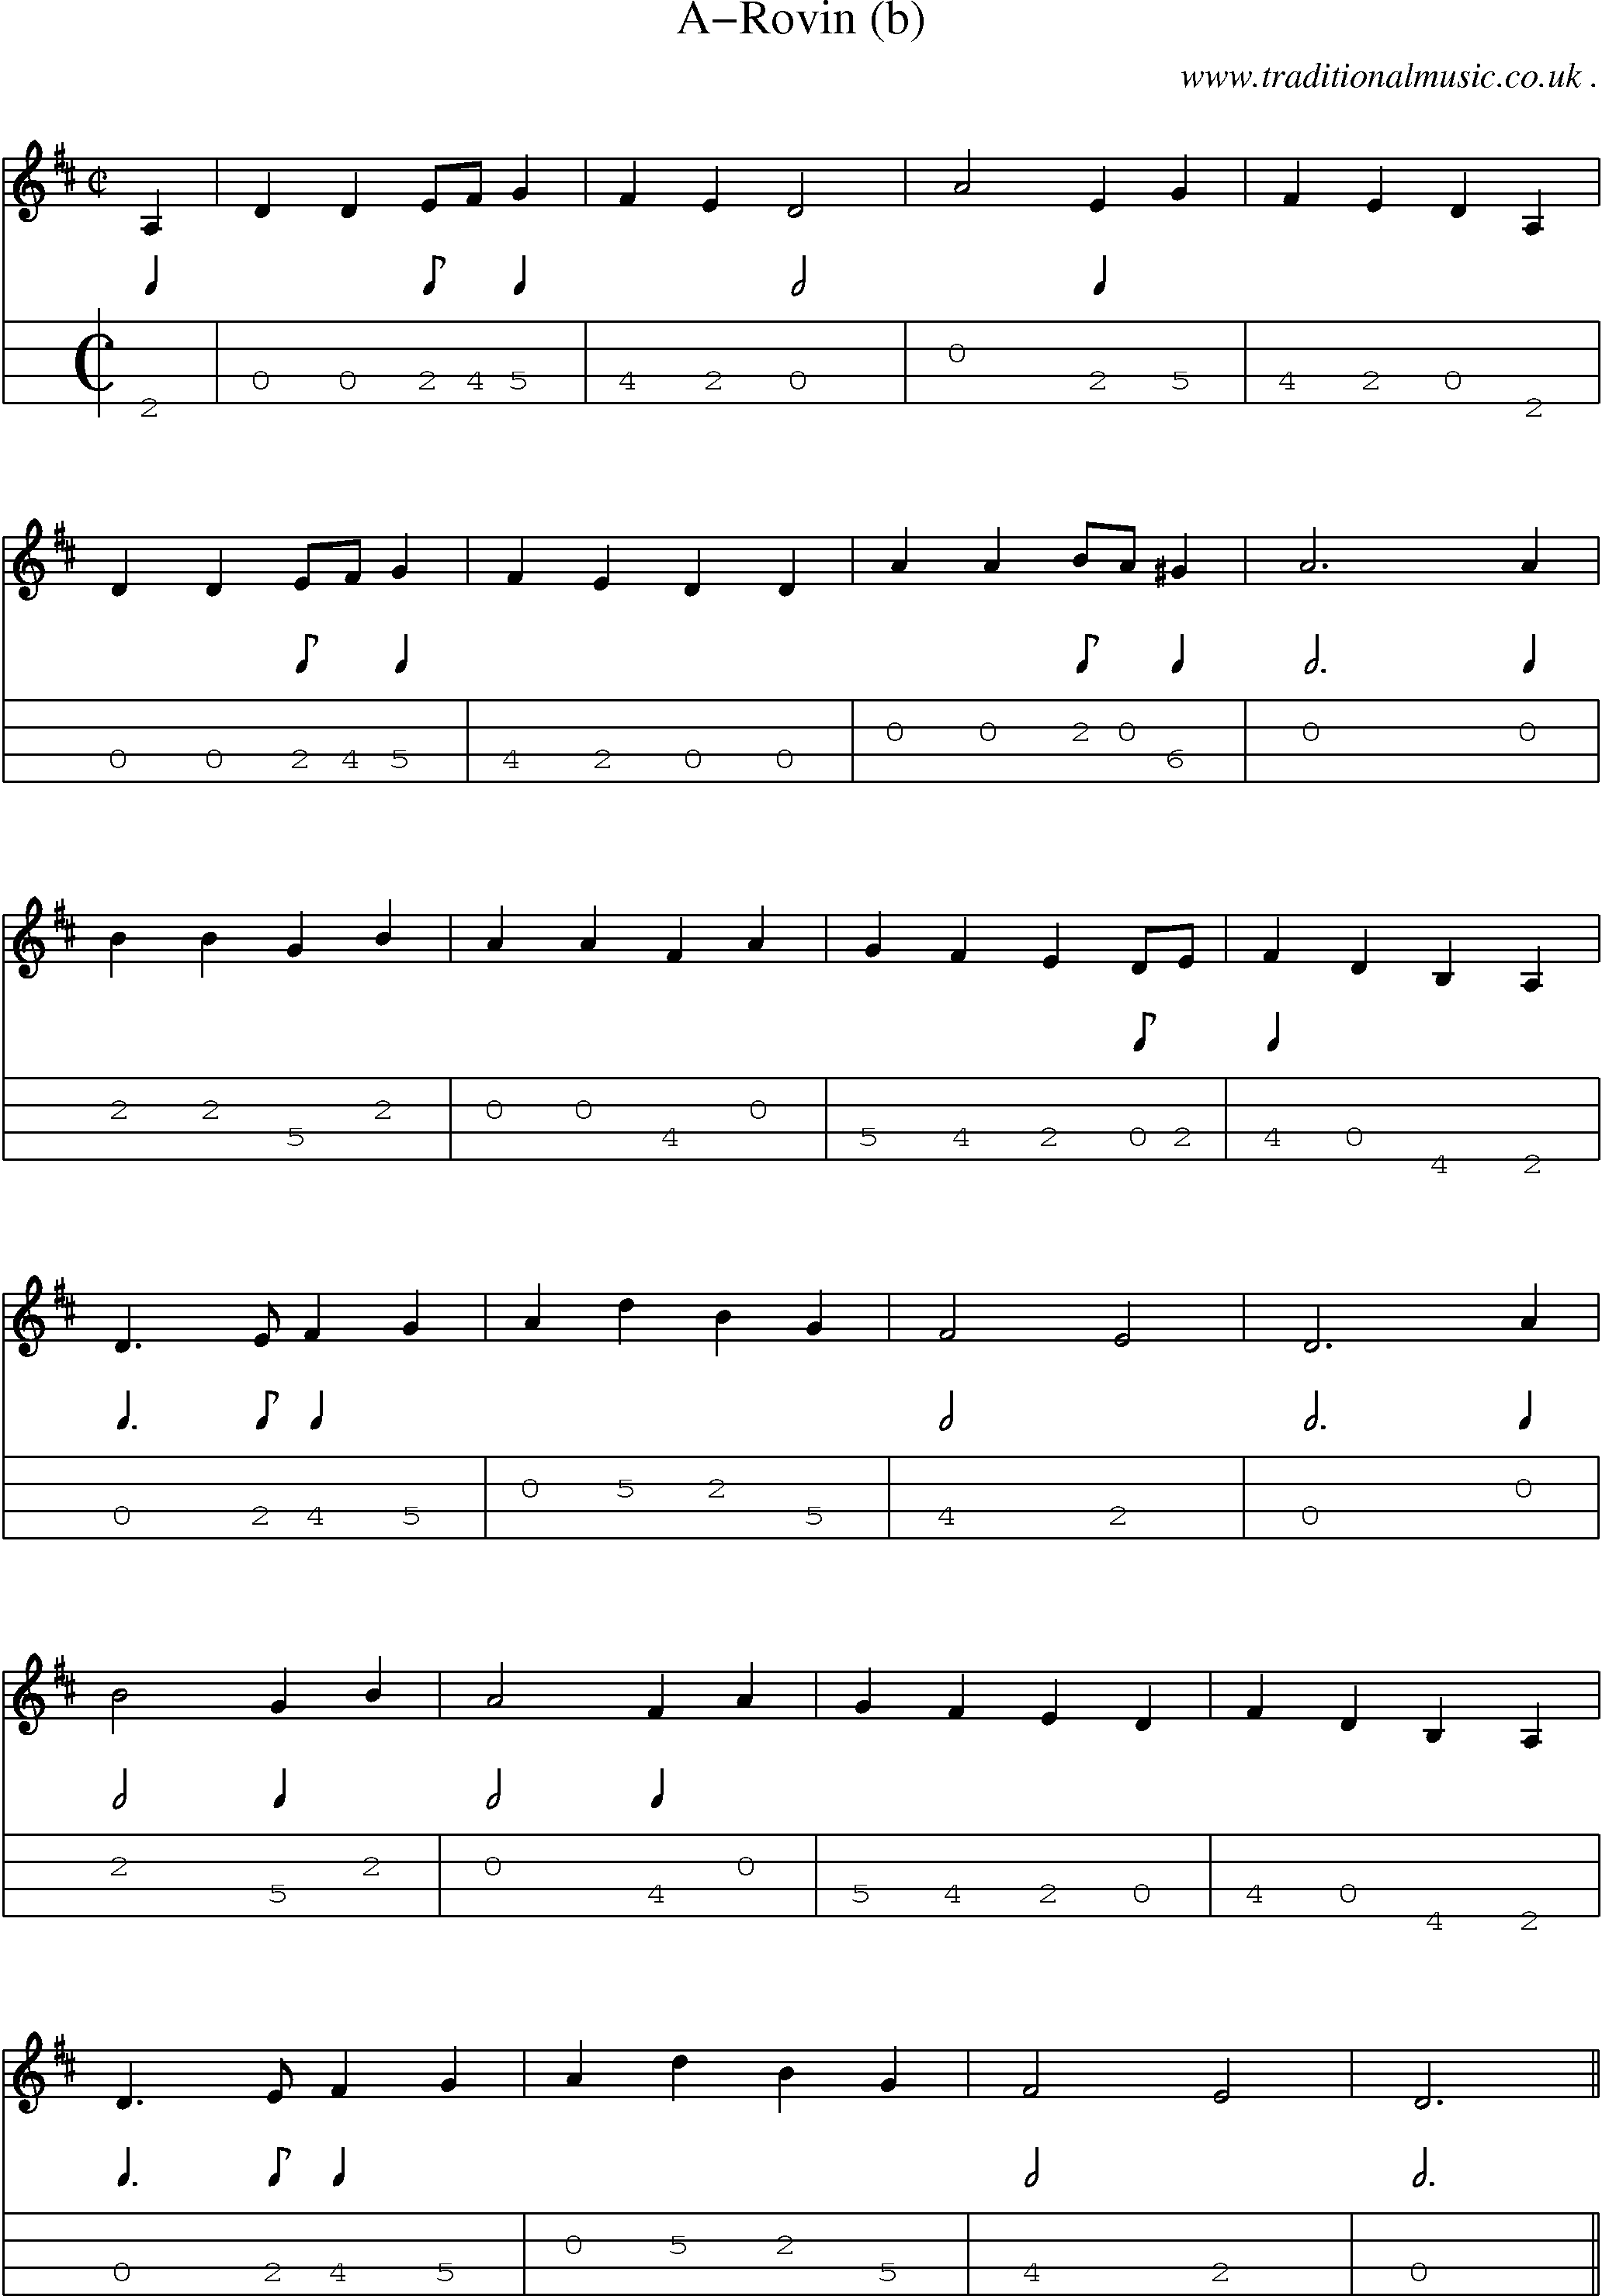 Sheet-Music and Mandolin Tabs for A-rovin (b)